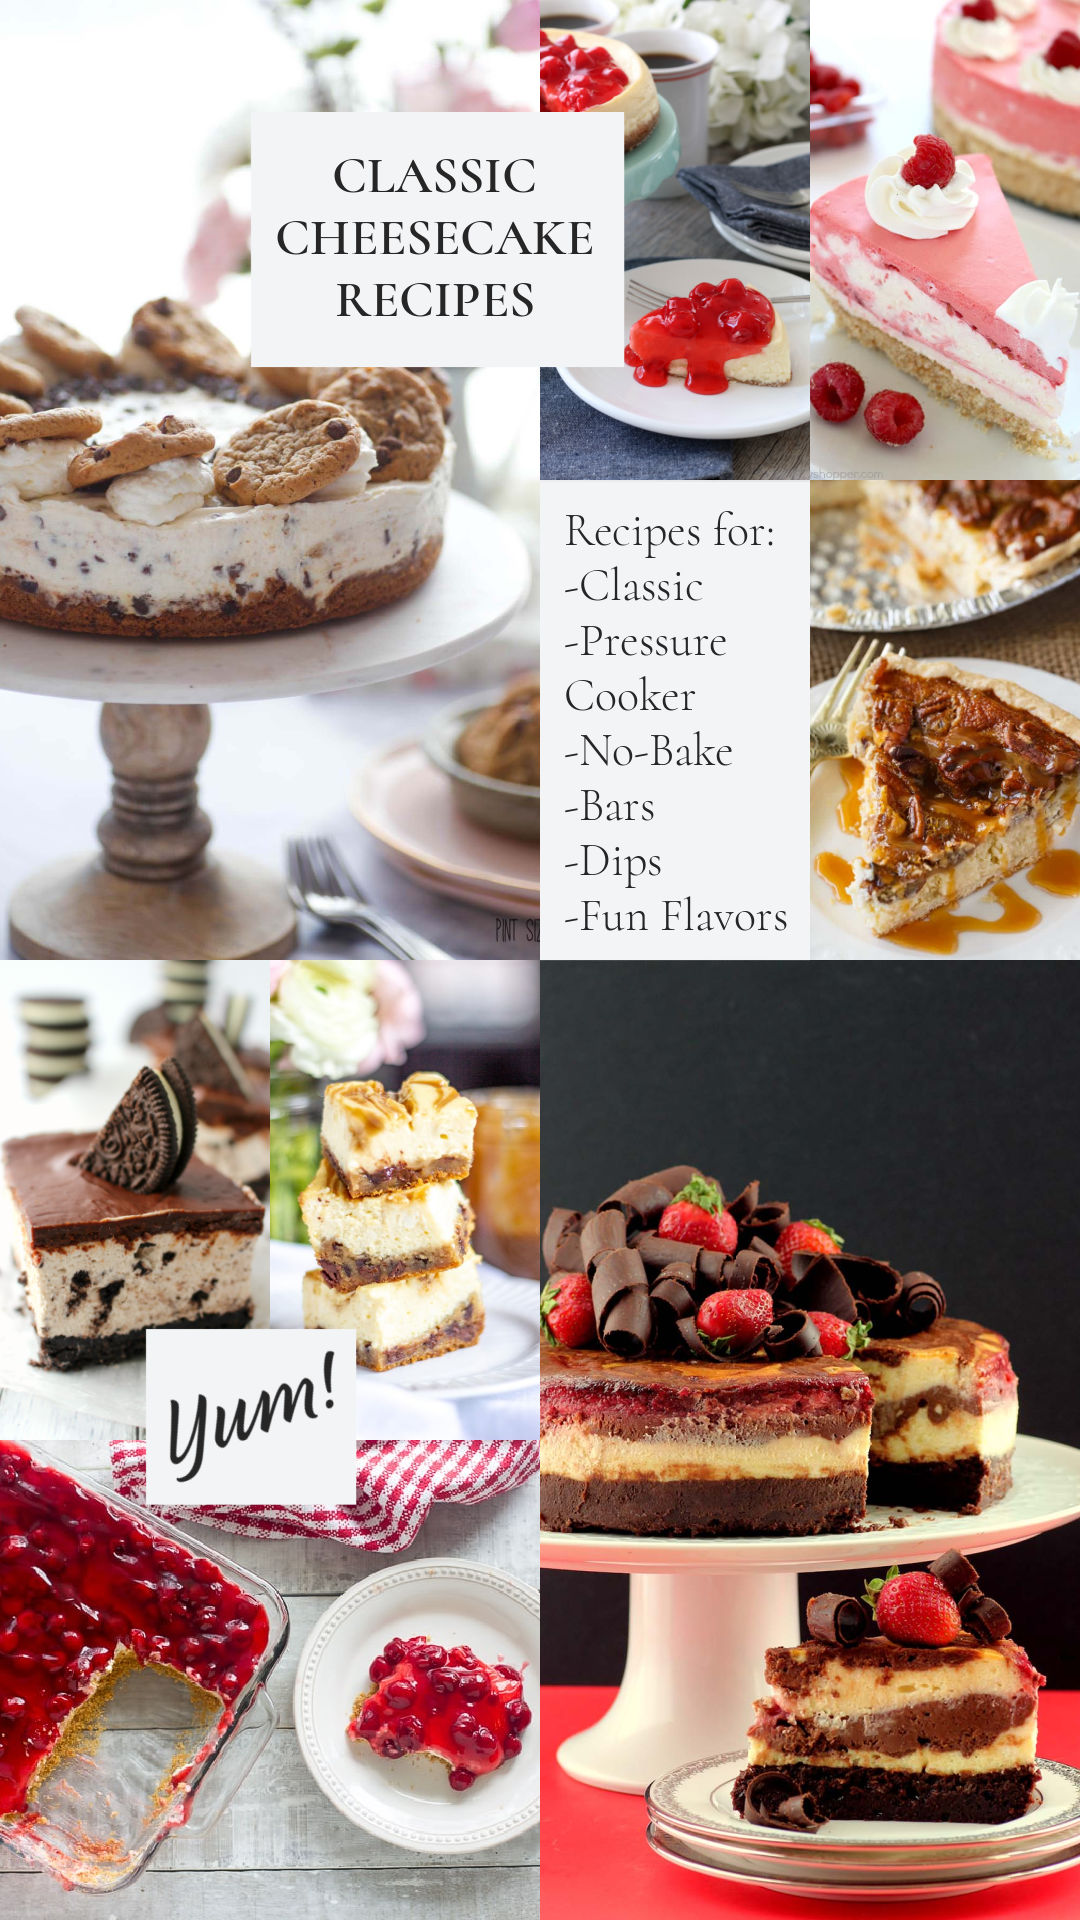 Here are some of my favorite Classic Cheesecake Recipes to get you inspired to get into the kitchen and make your family a dessert they love.